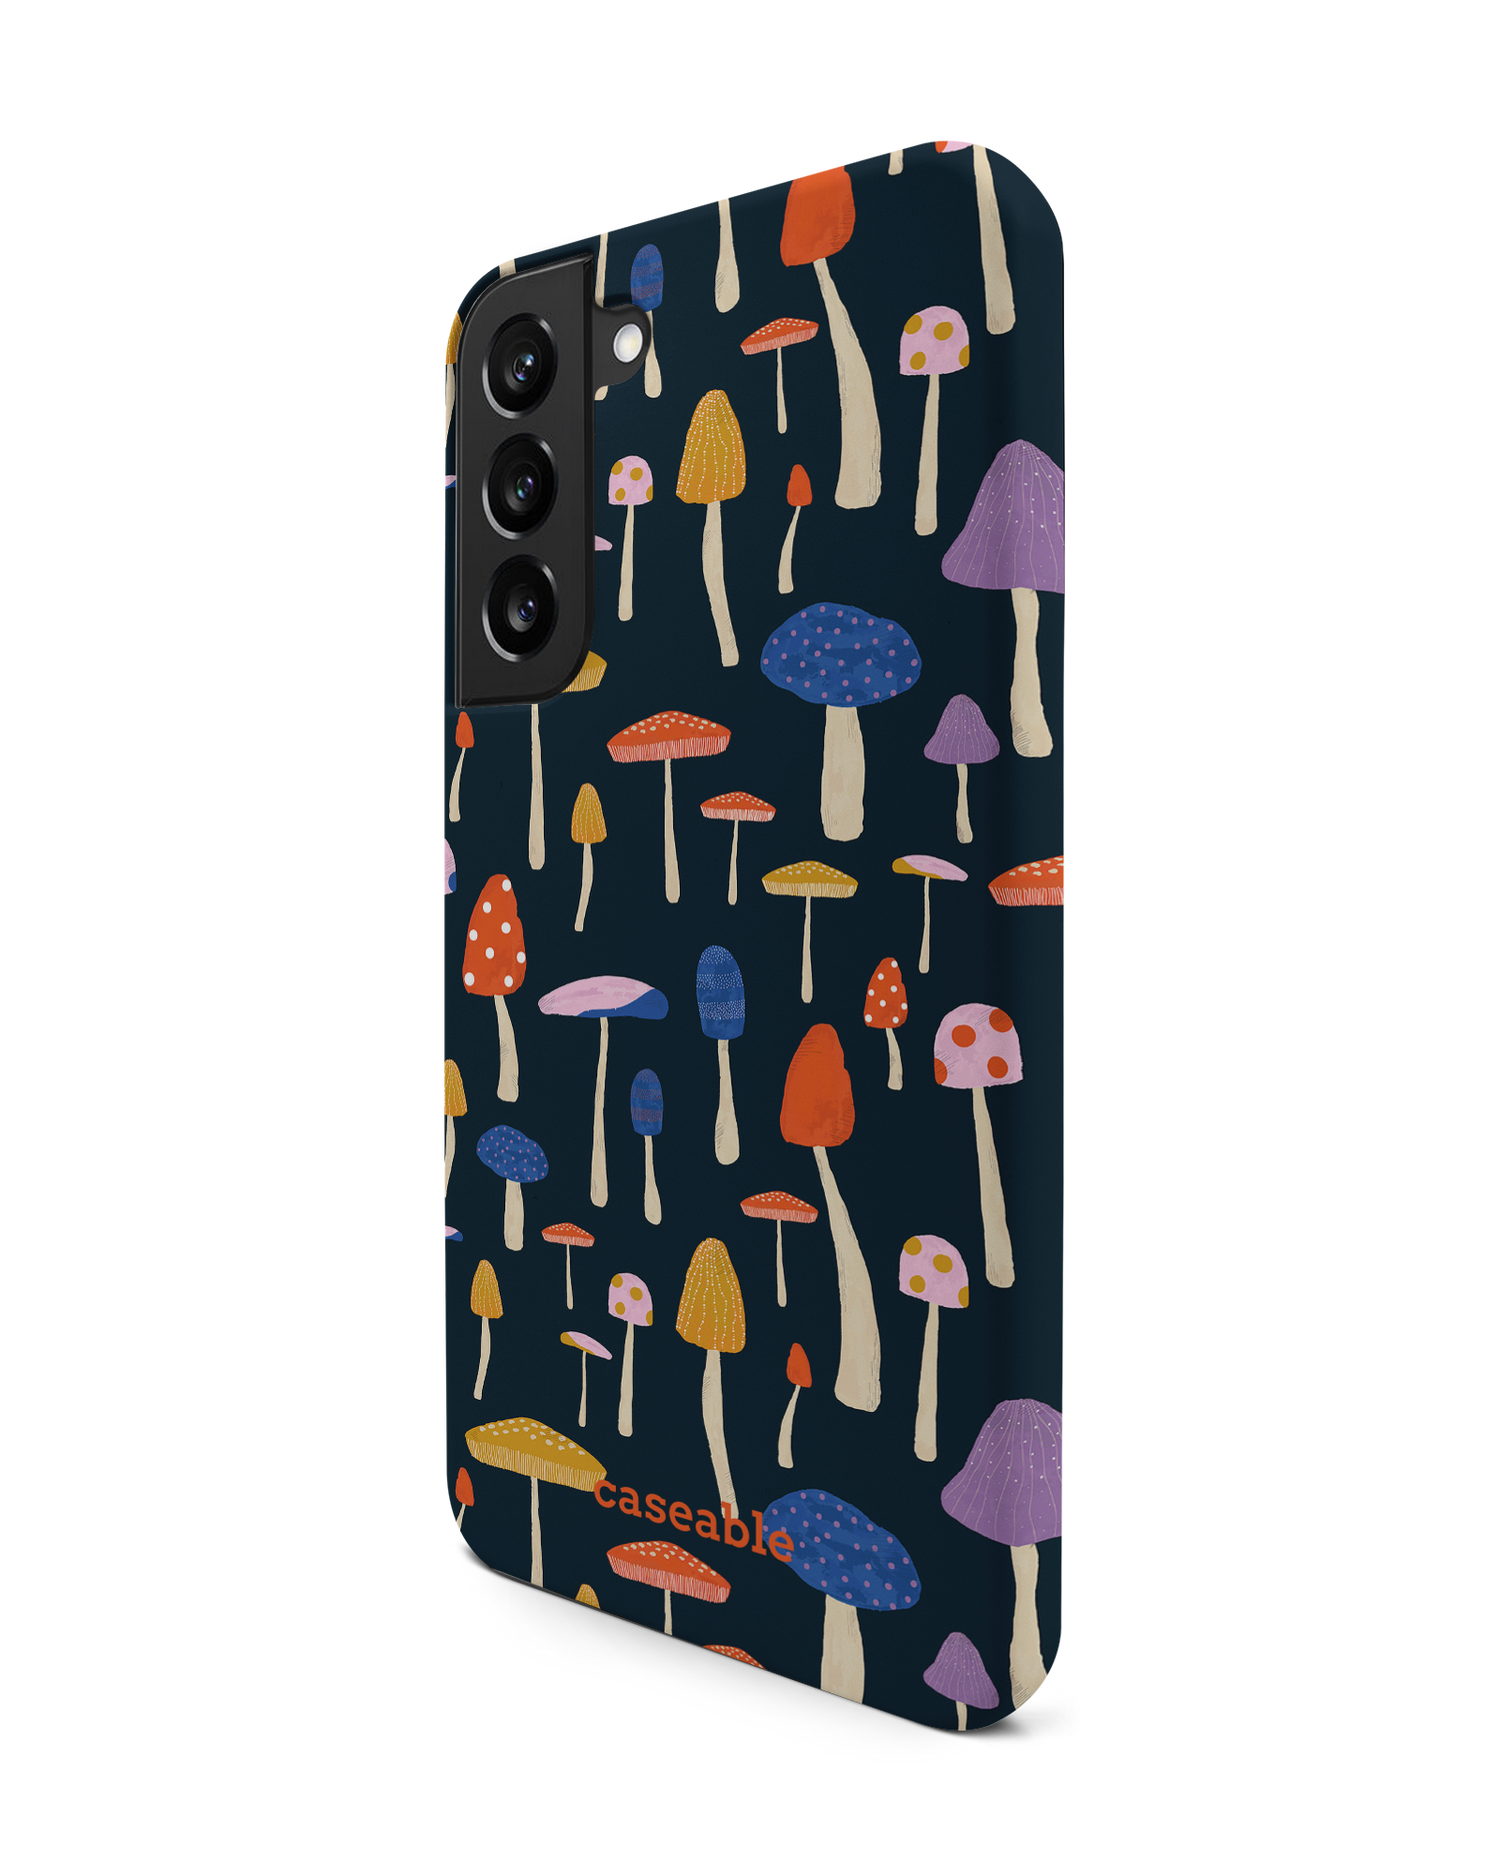 Mushroom Delights Premium Phone Case Samsung Galaxy S22 Plus 5G: View from the right side